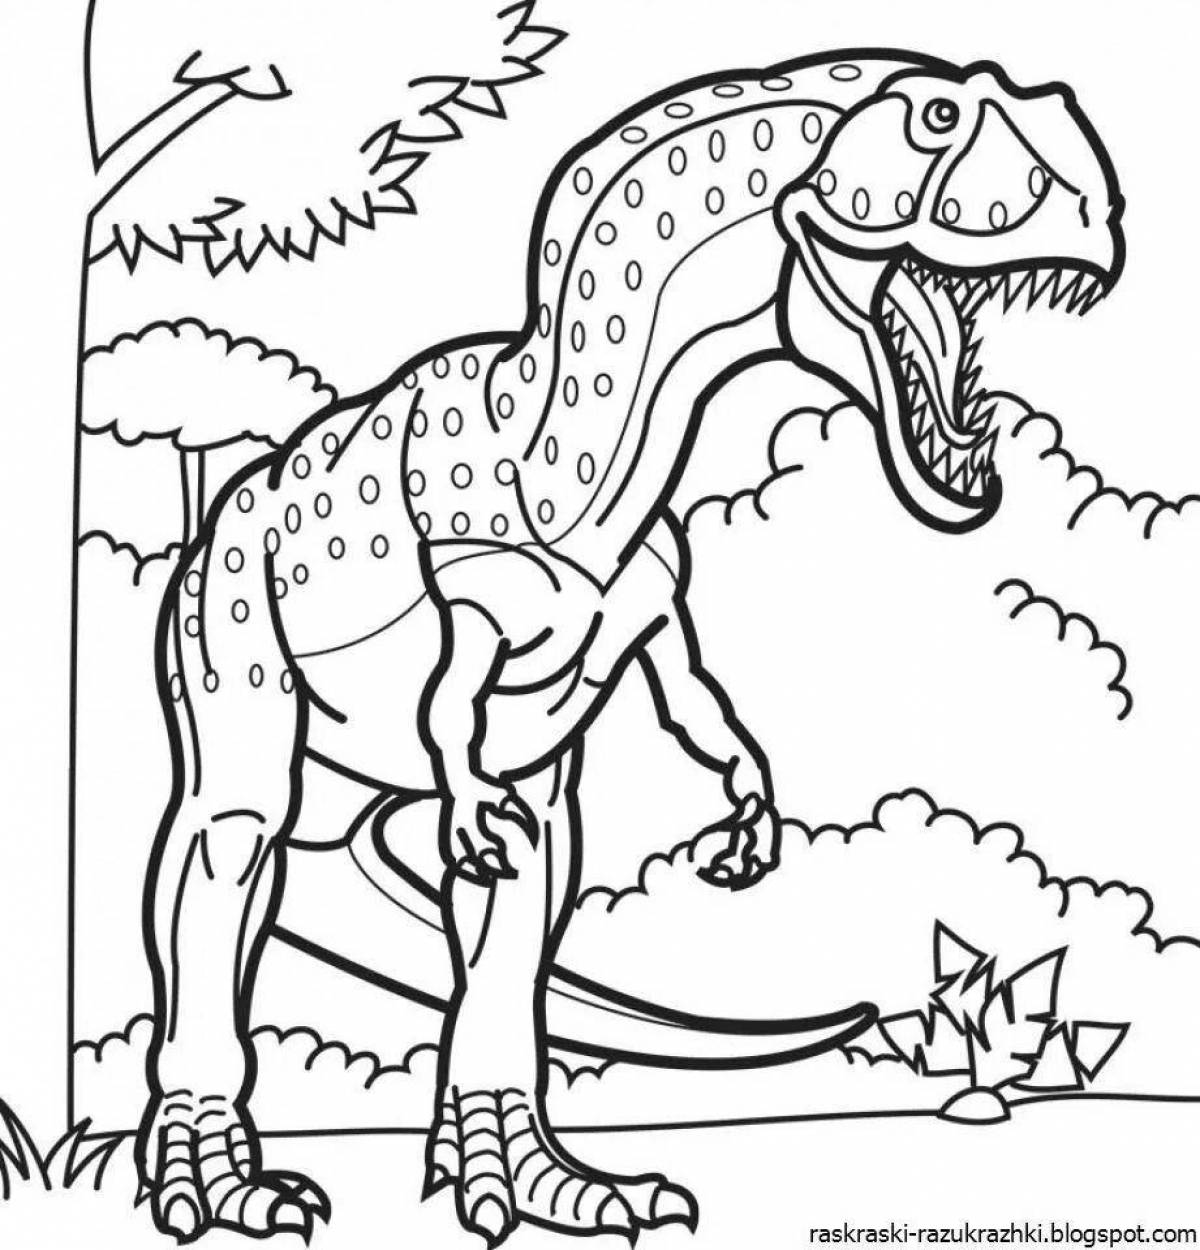 Coloring pages with playful dinosaurs for children 5-8 years old